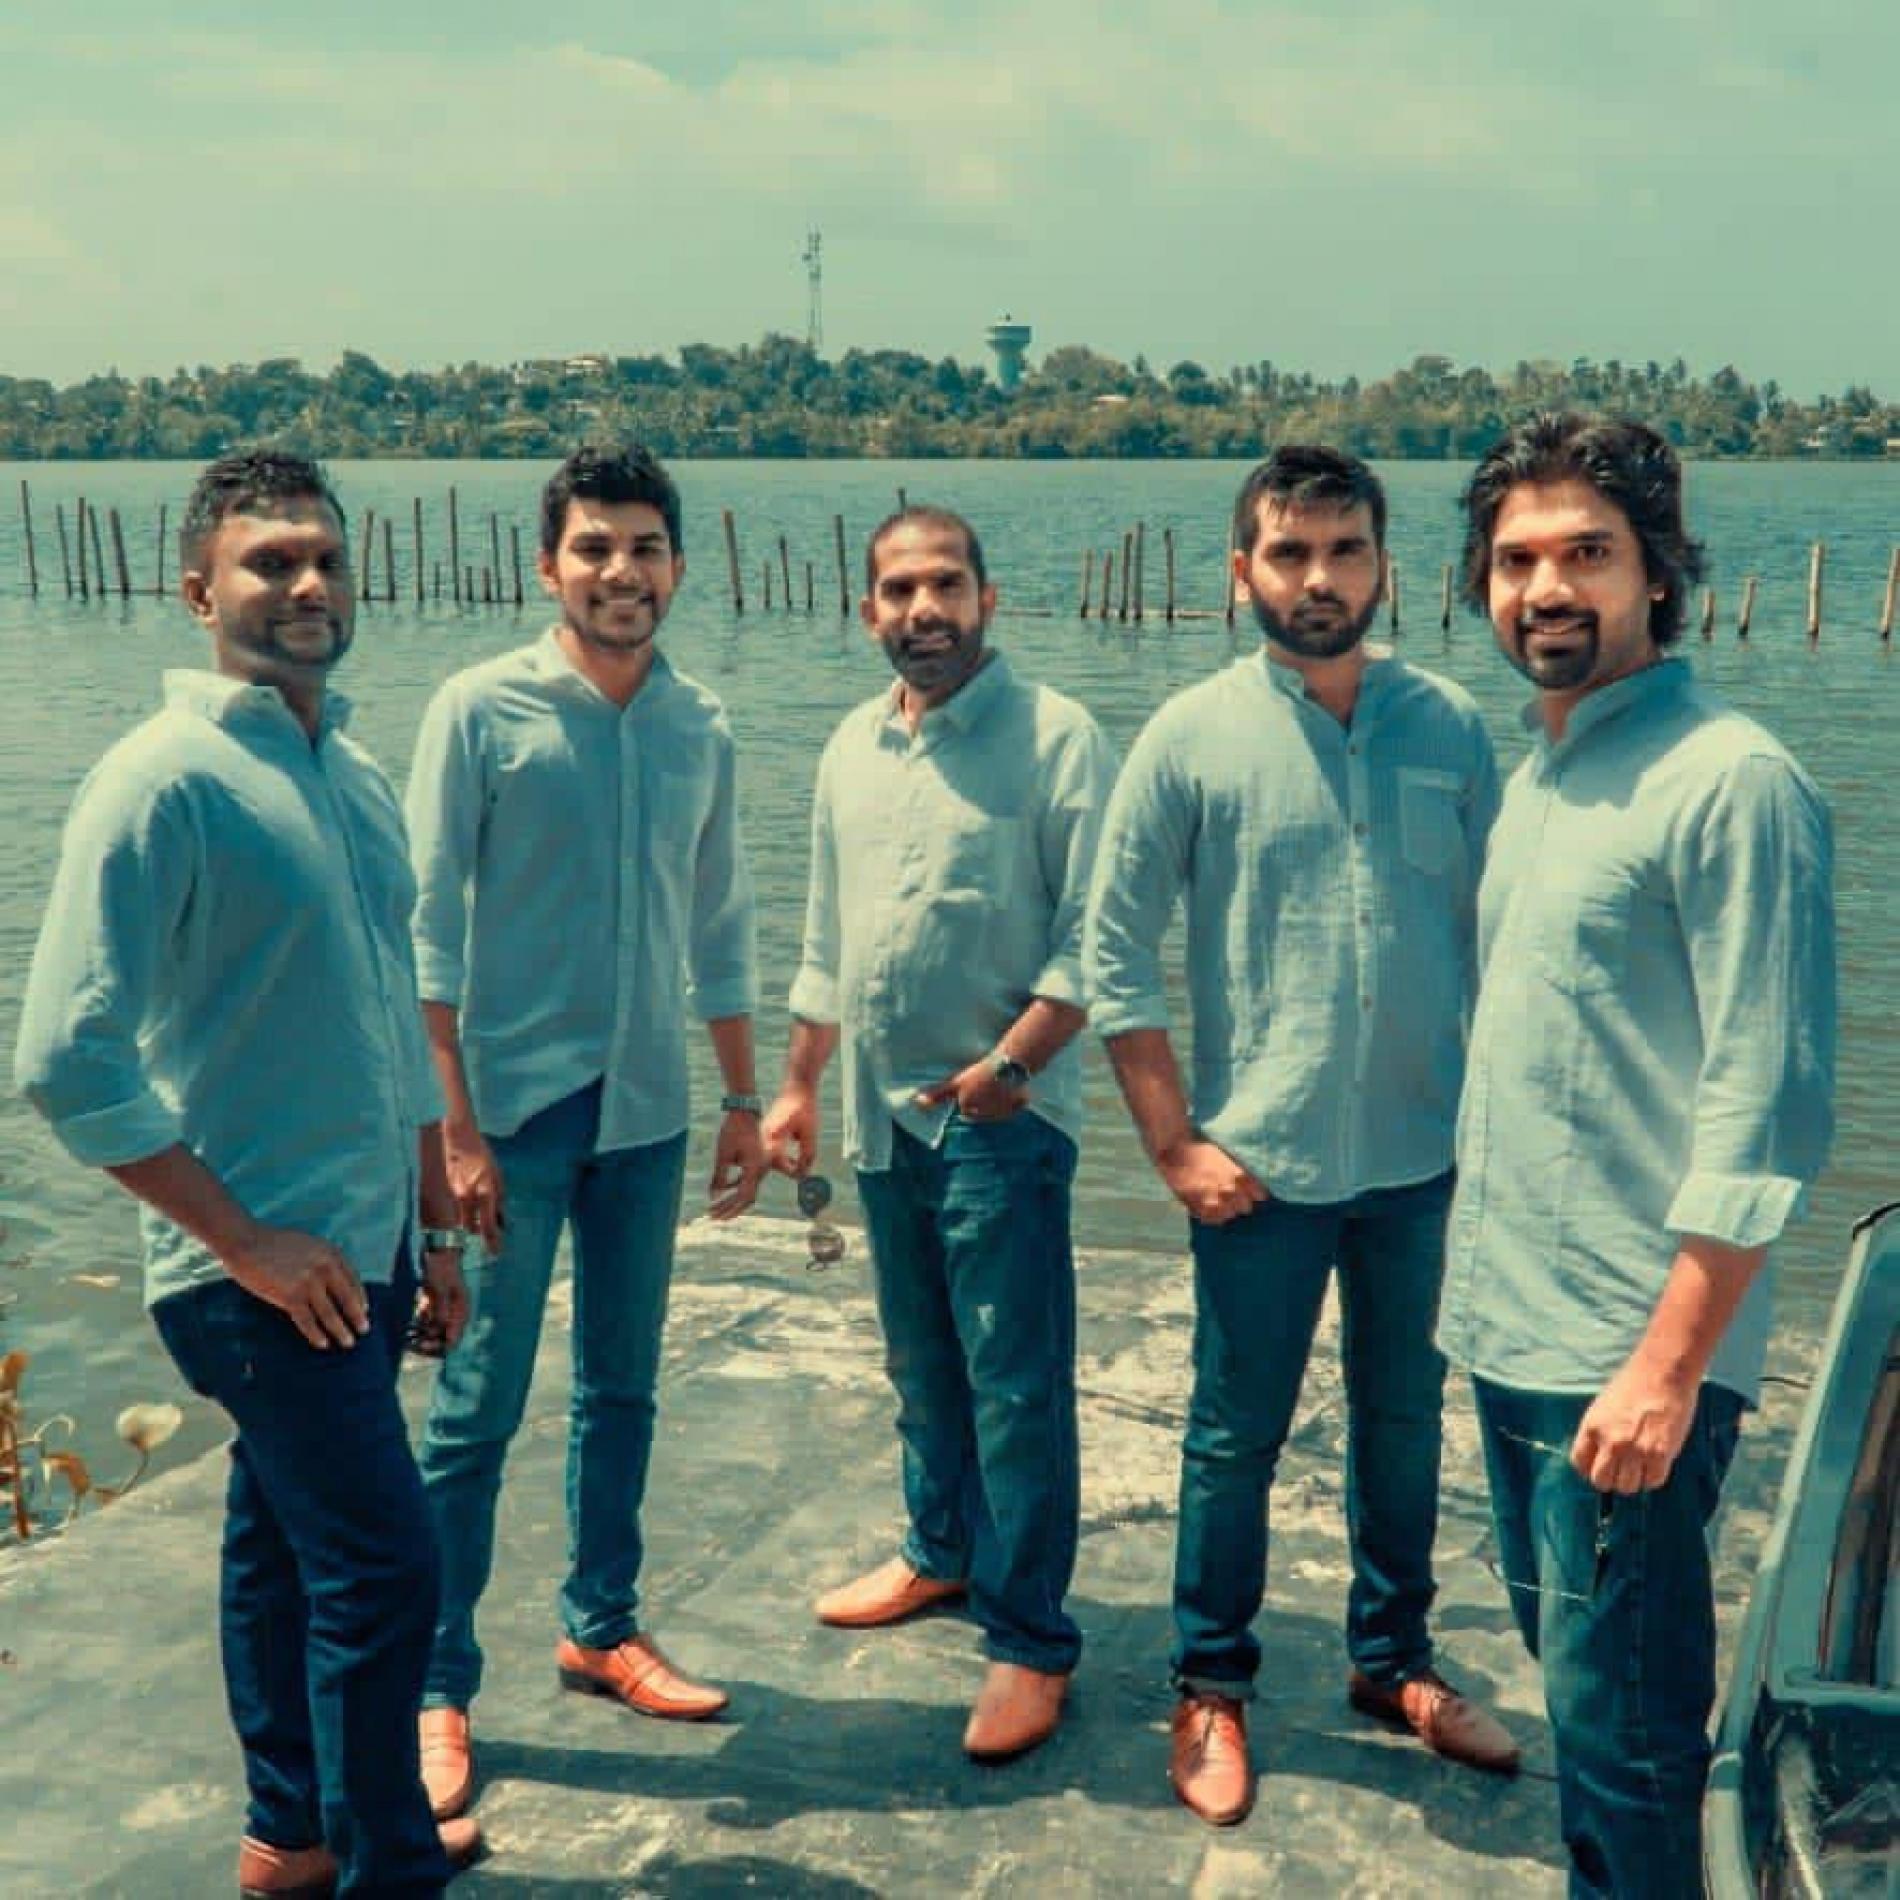 New Music : Take Me Home – Acappella Cover By SideWalk Vocal Band